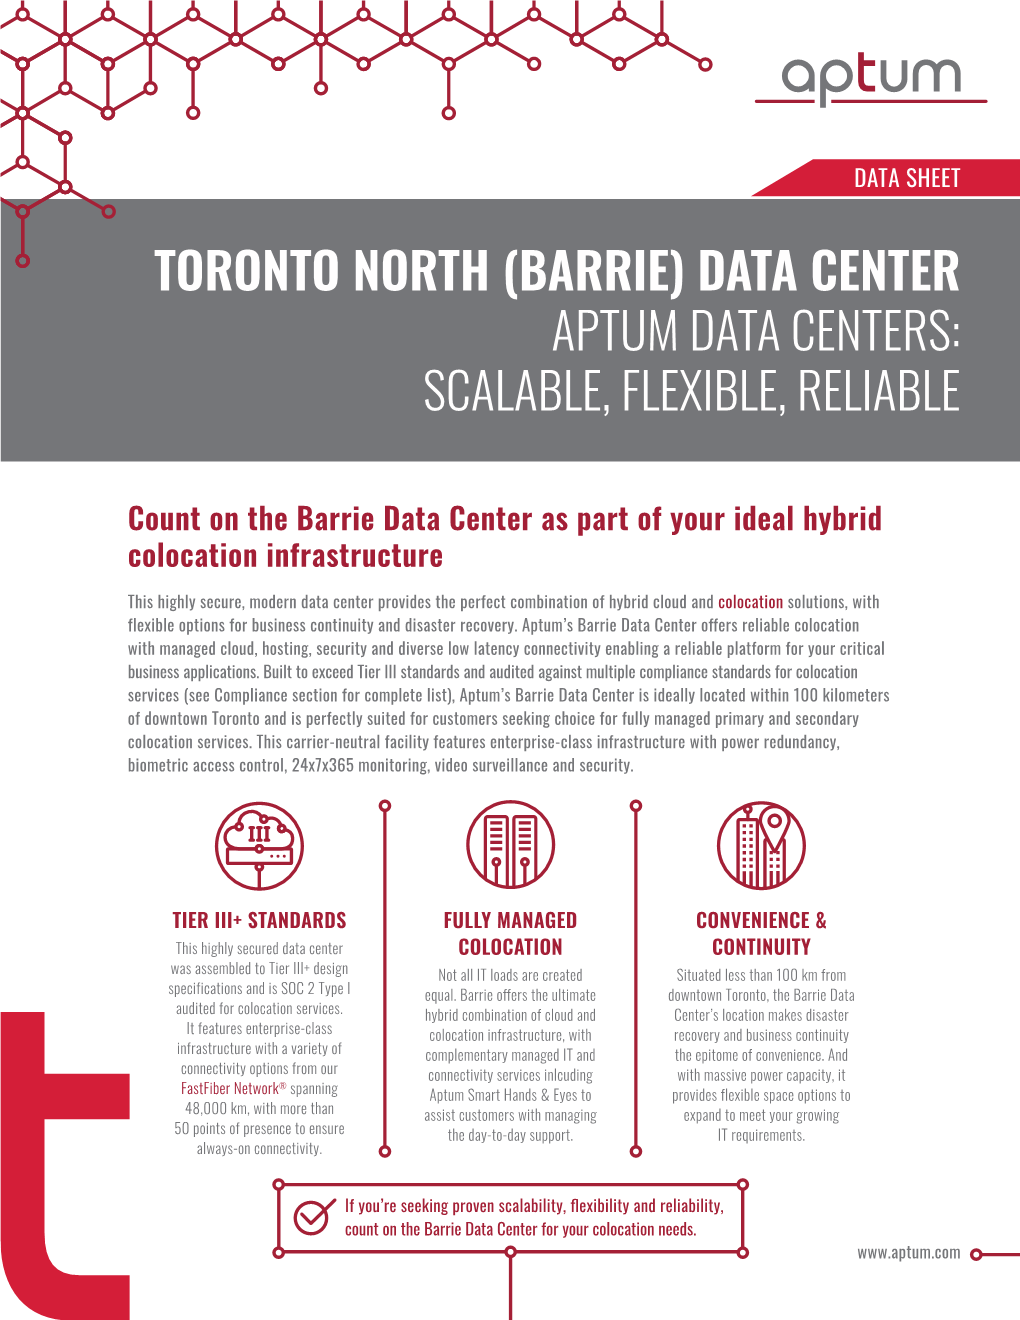 Toronto North (Barrie) Data Center Aptum Data Centers: Scalable, Flexible, Reliable